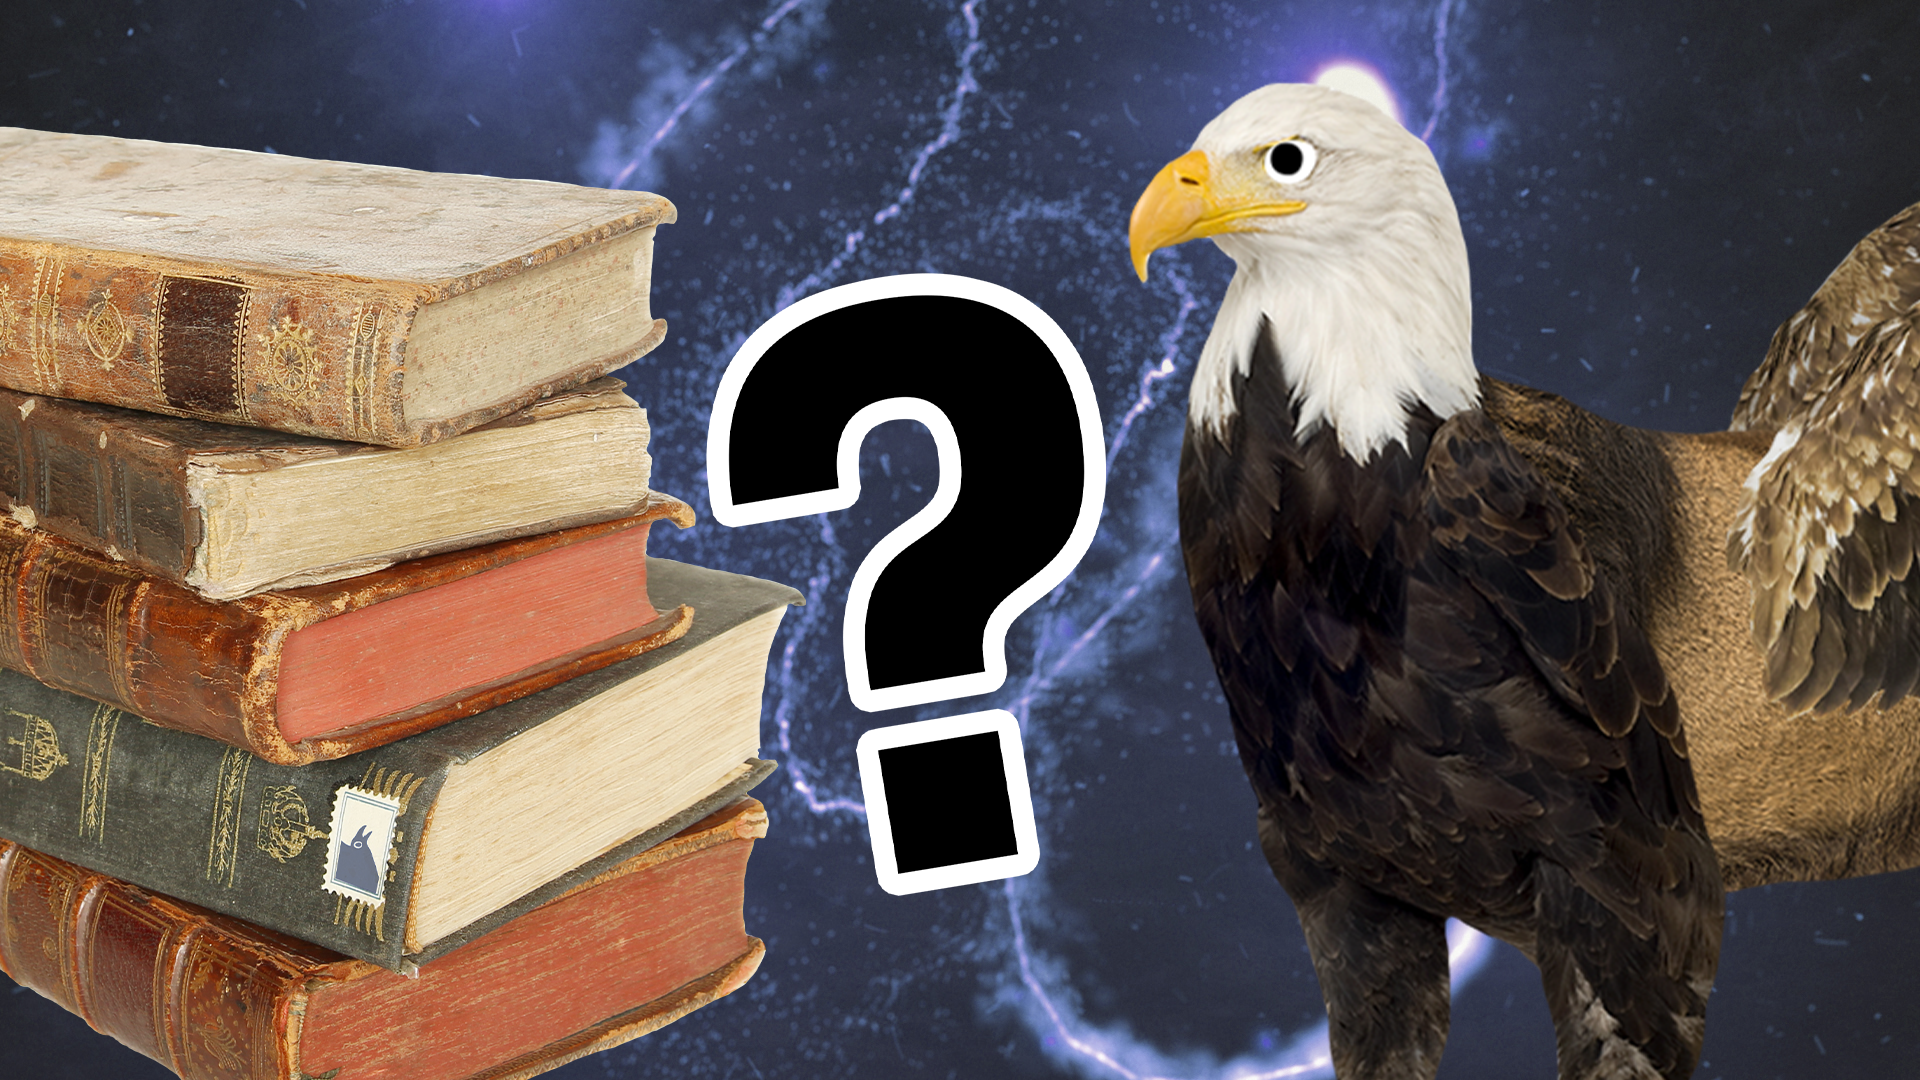 Hippogriff, books and question mark